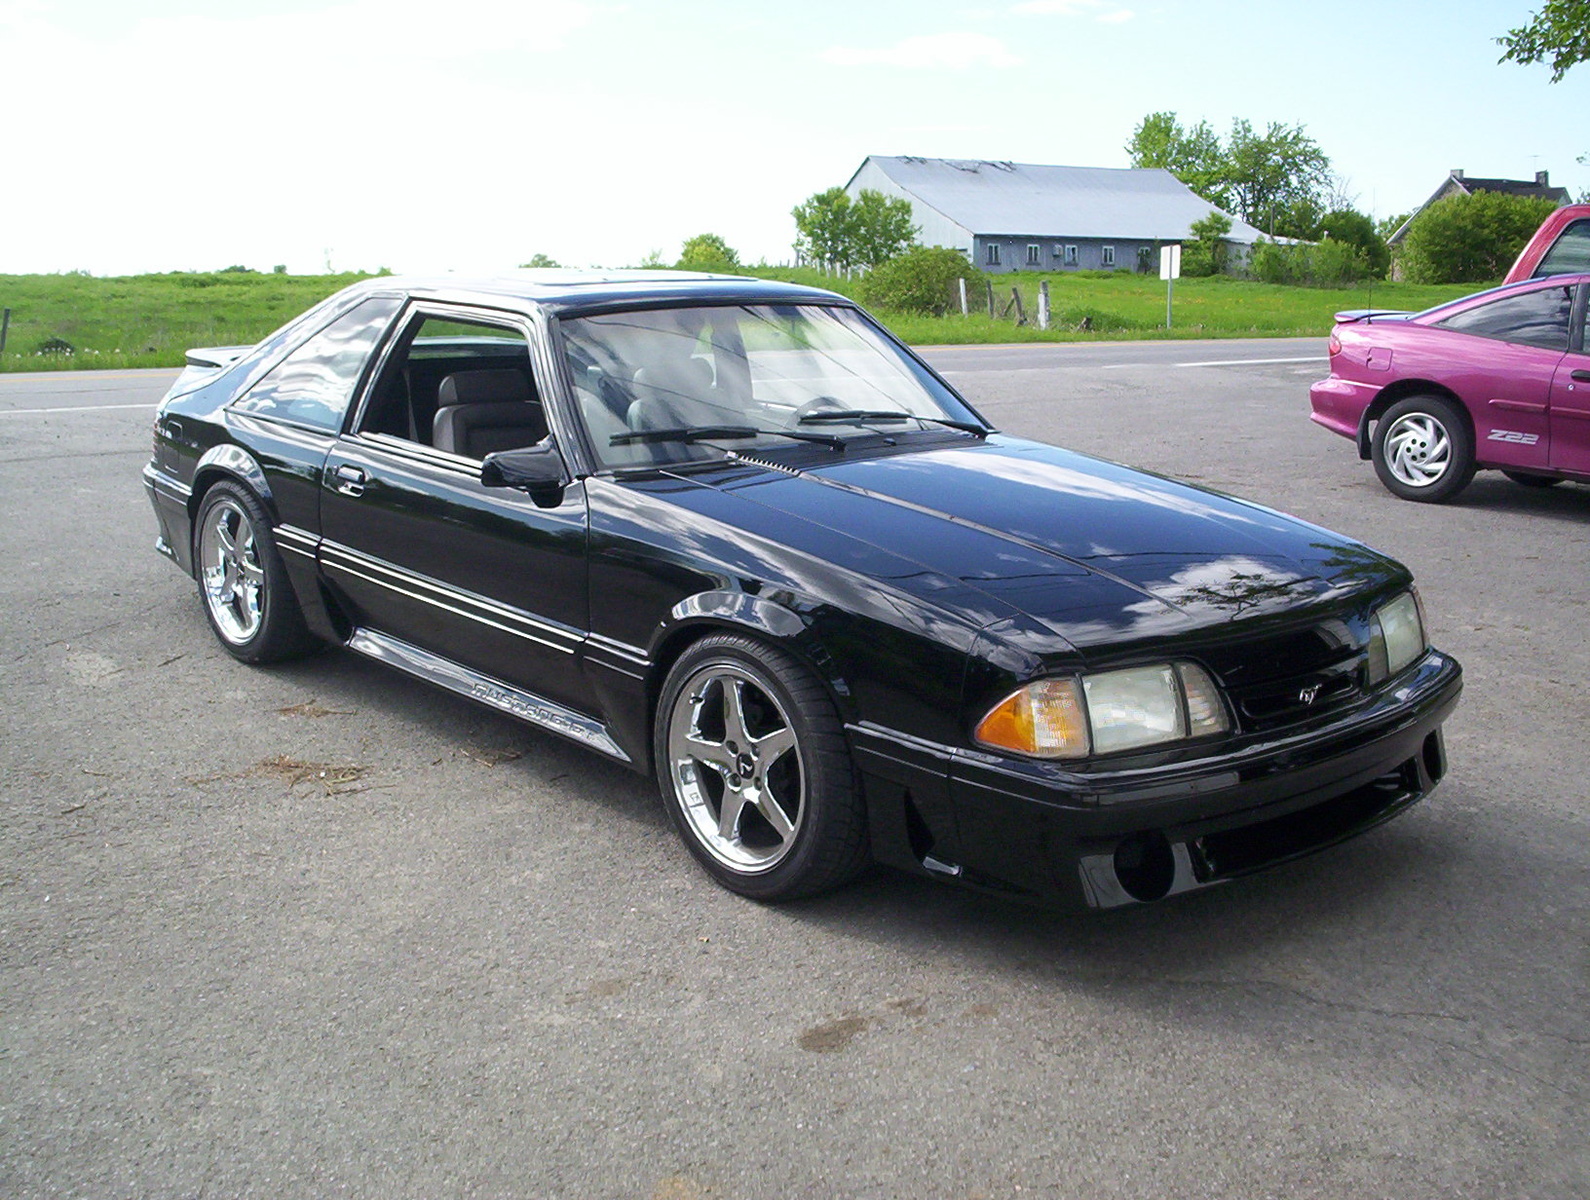 1992 Ford mustang gt specs #3